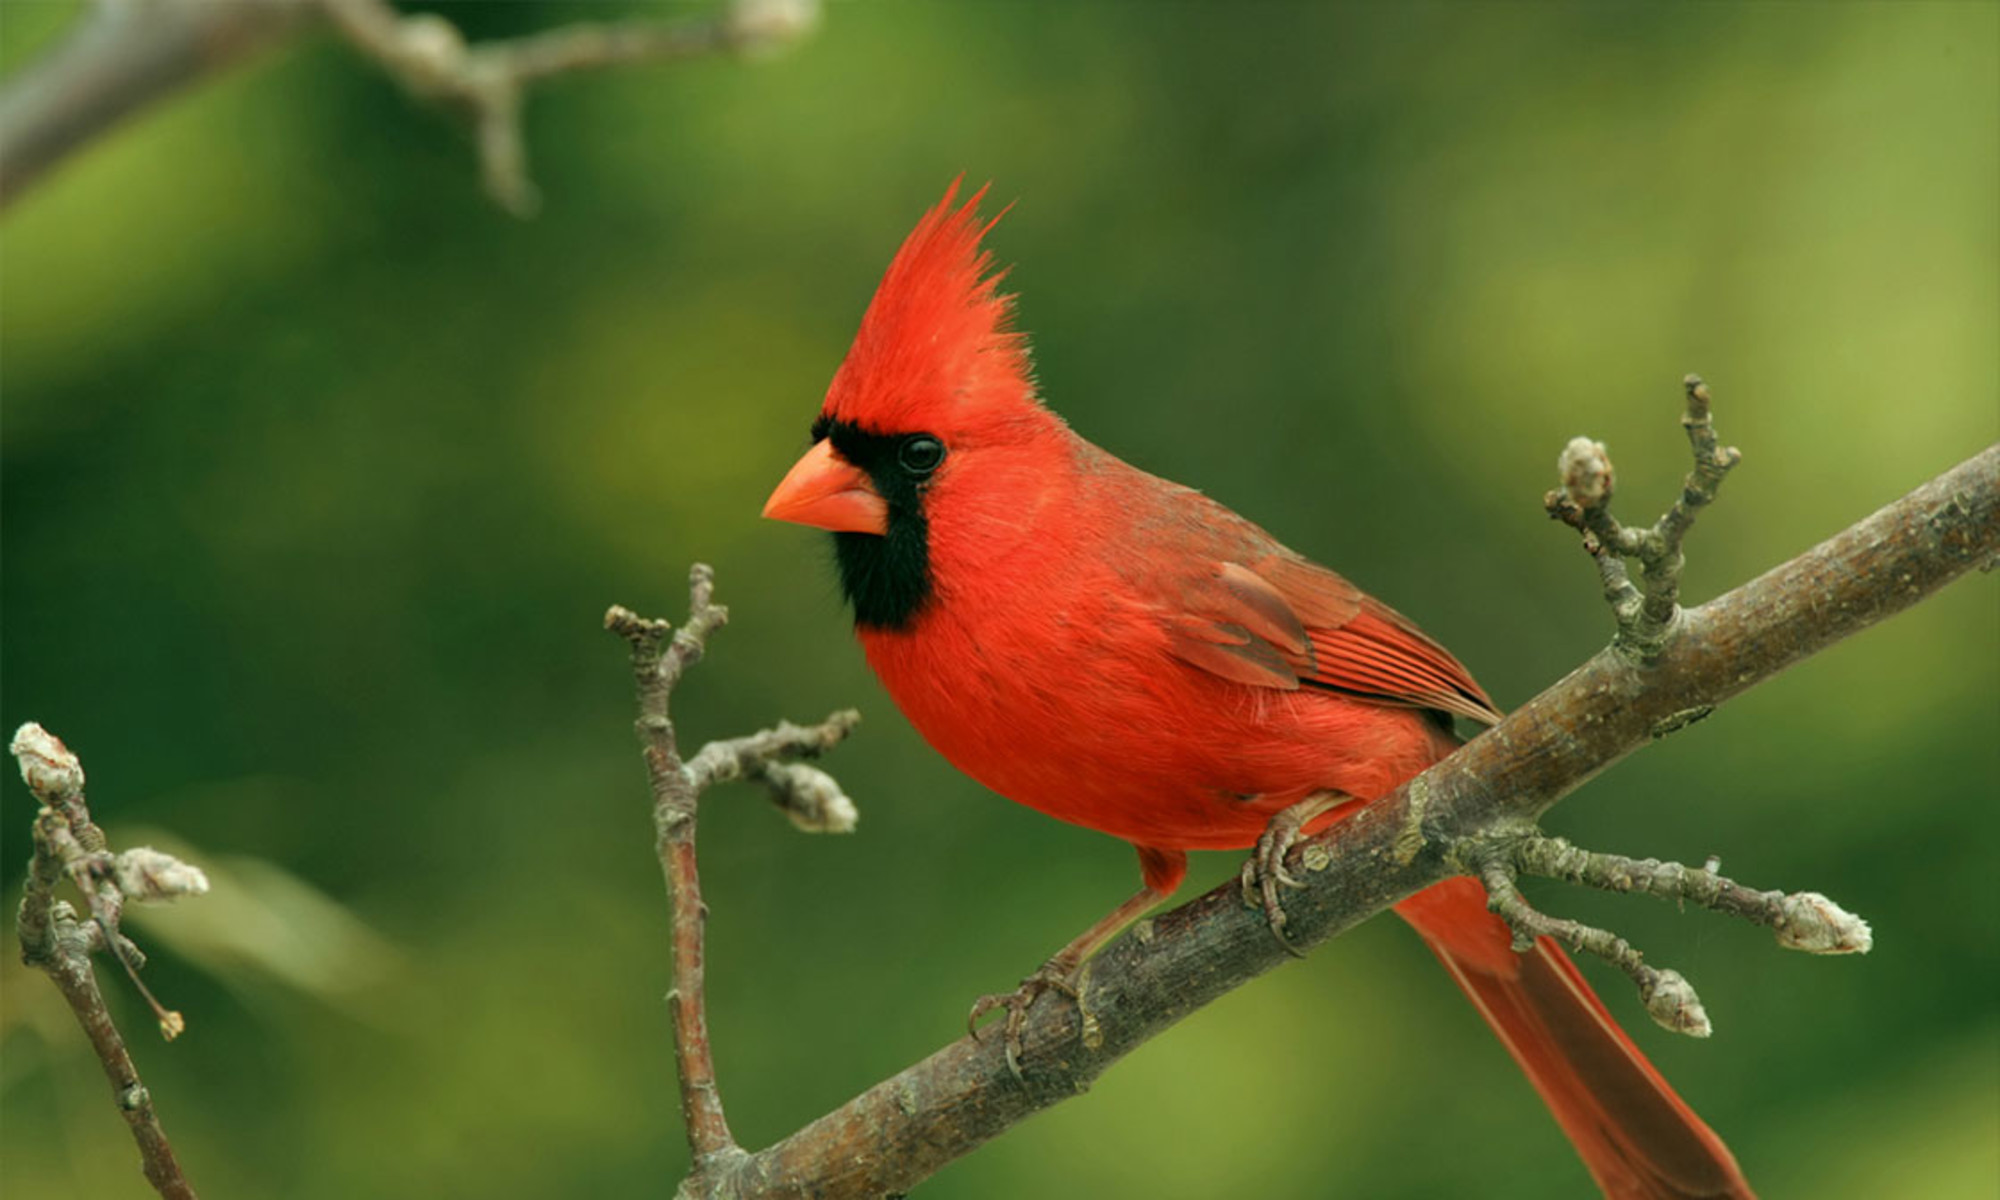 3. "Cardinal Bird Tattoos: Meaning and Symbolism" - wide 6